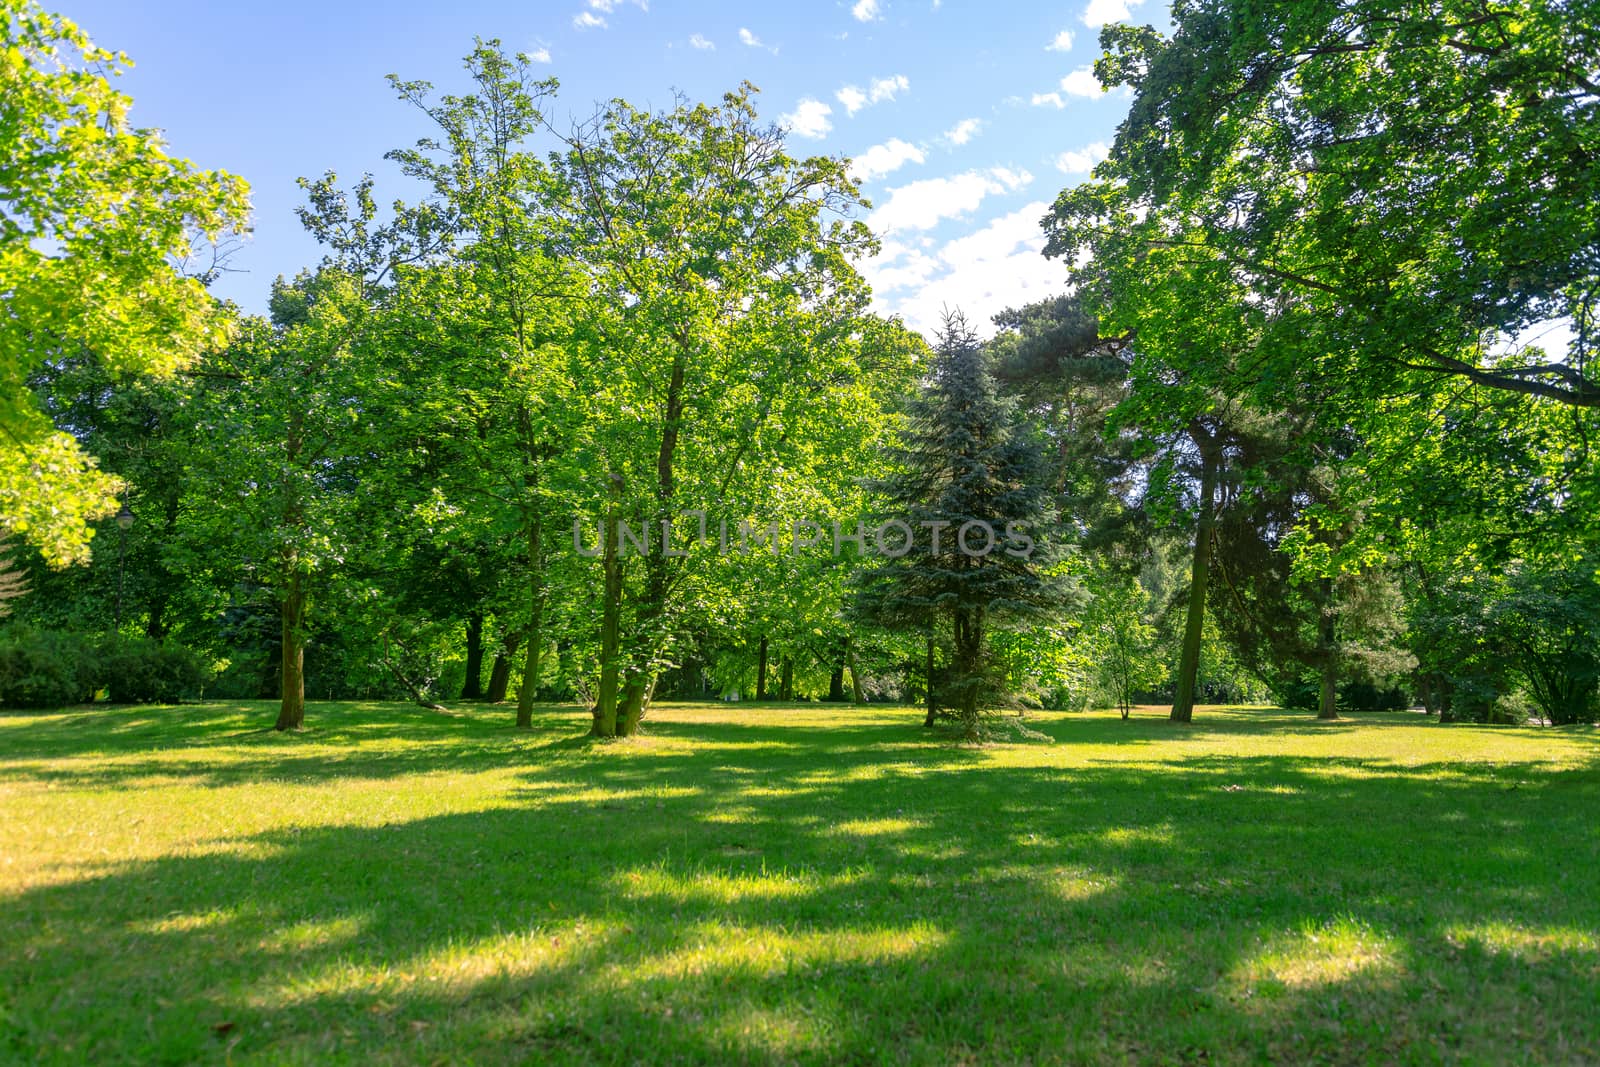 Idyllic nature landscape - green trees and lawn in a public park on a sunny day.